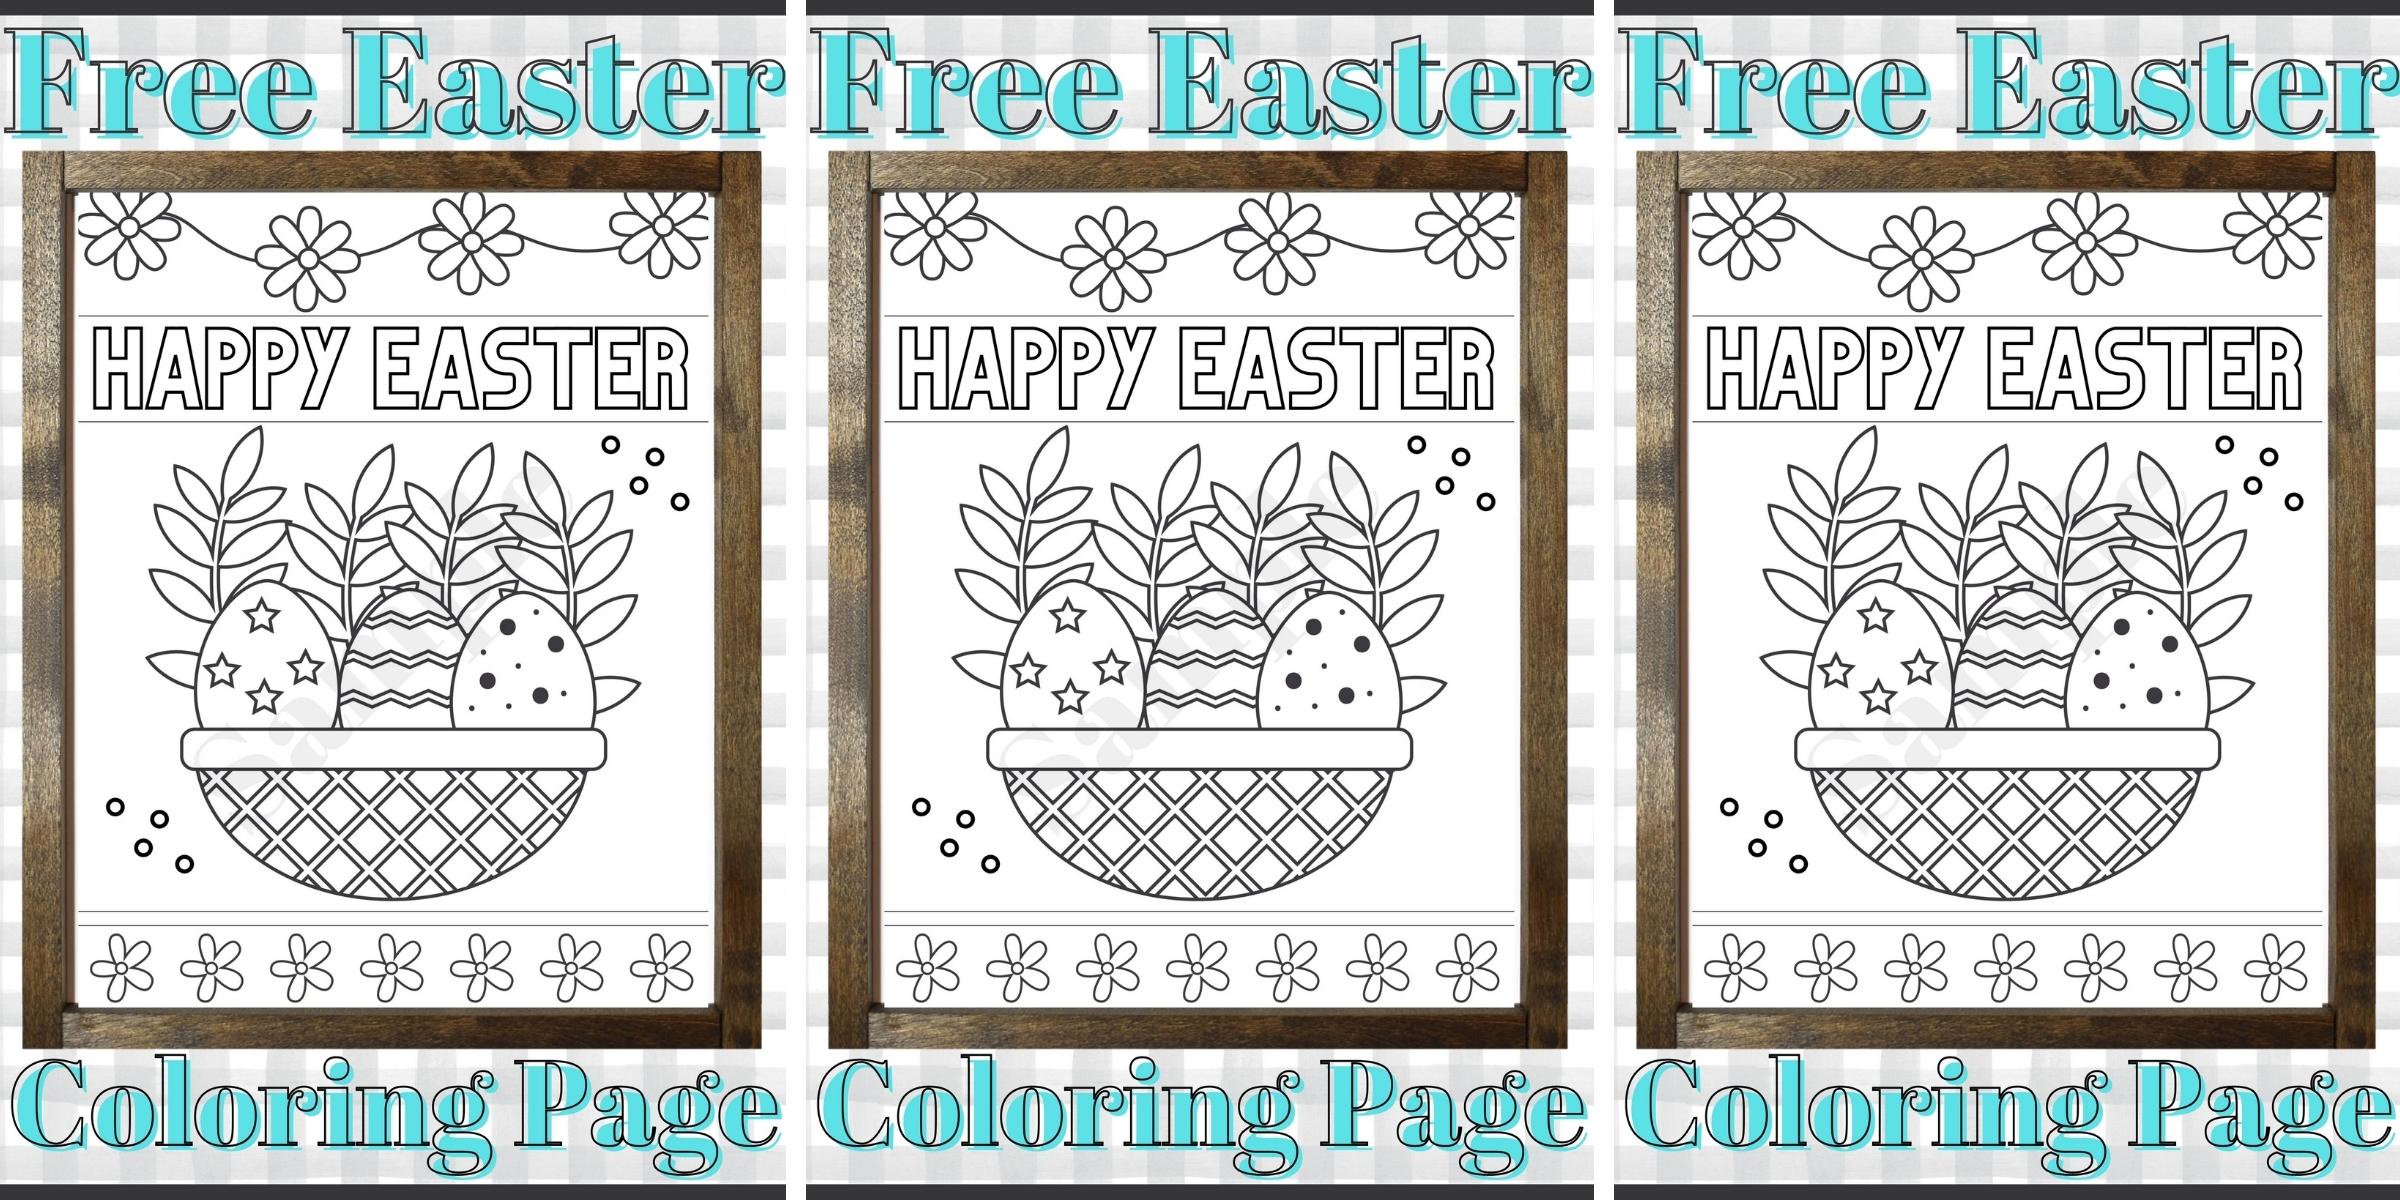 Free Easter Coloring Page Printable